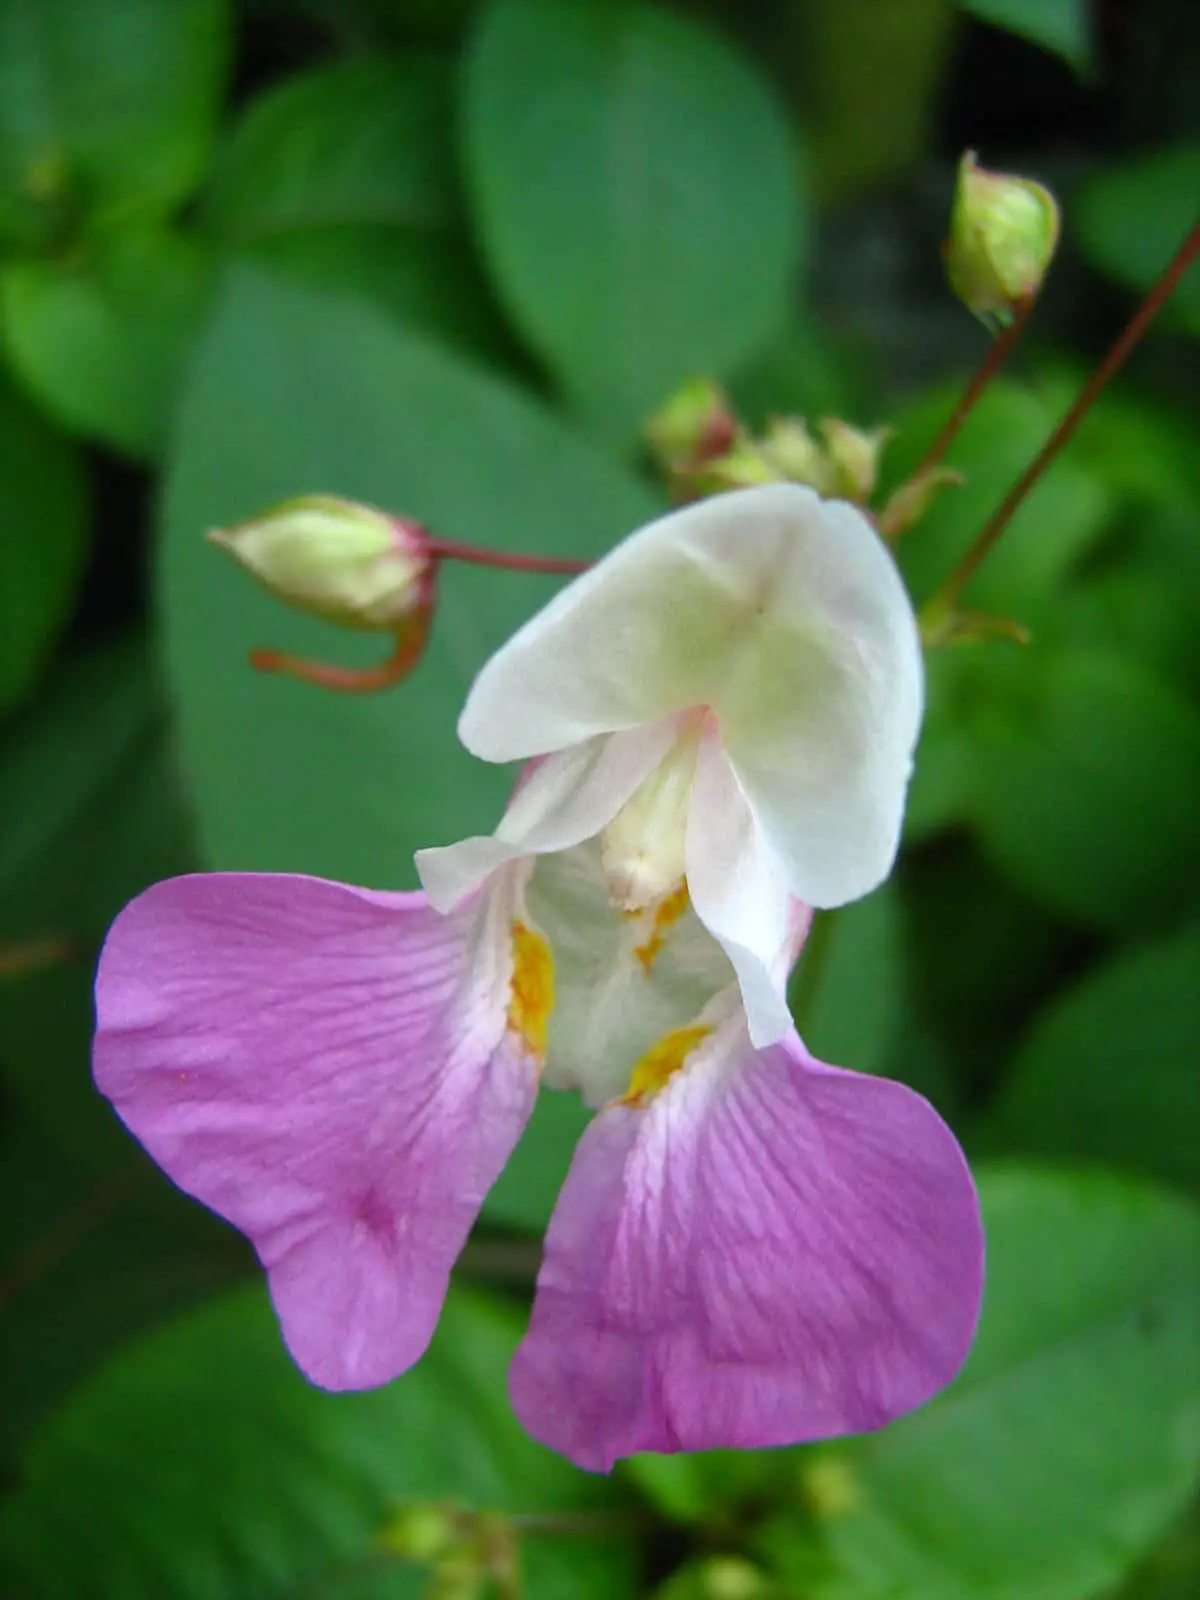 Himalayan balsam flowers come in multiple shades but all resemble the same shape